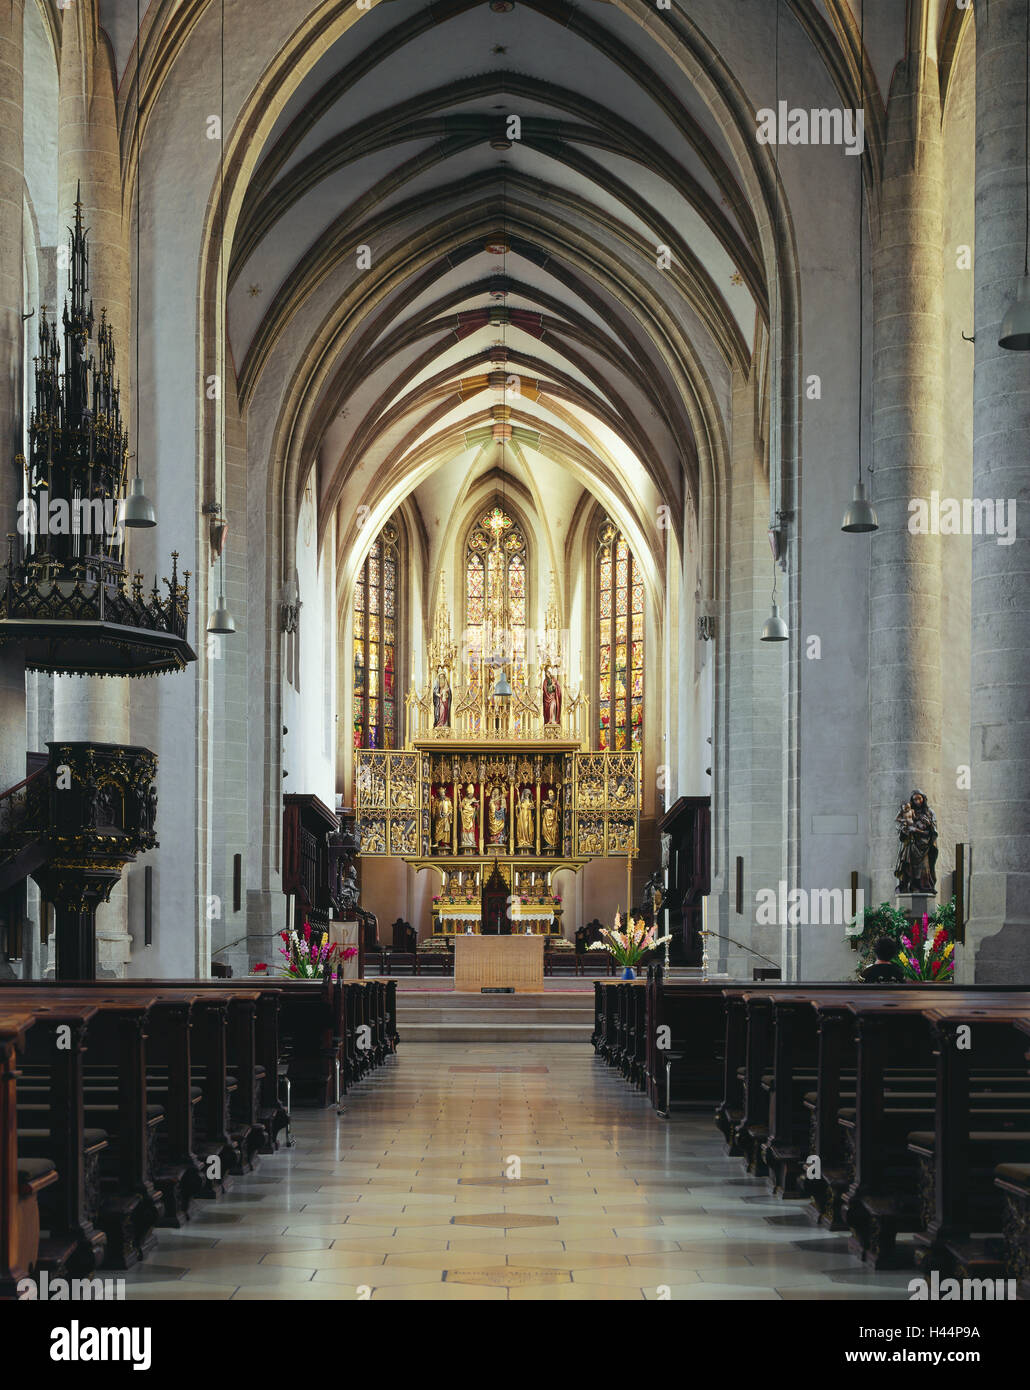 Germany, Bavaria, Eichstatt, cathedral, interior view, town, university town, church, inside, hall church, Late-Gothic, altar, chancel, middle shrine, high altar, east choir, couple, tourist, believers, sightseeing, place of interest, Stock Photo